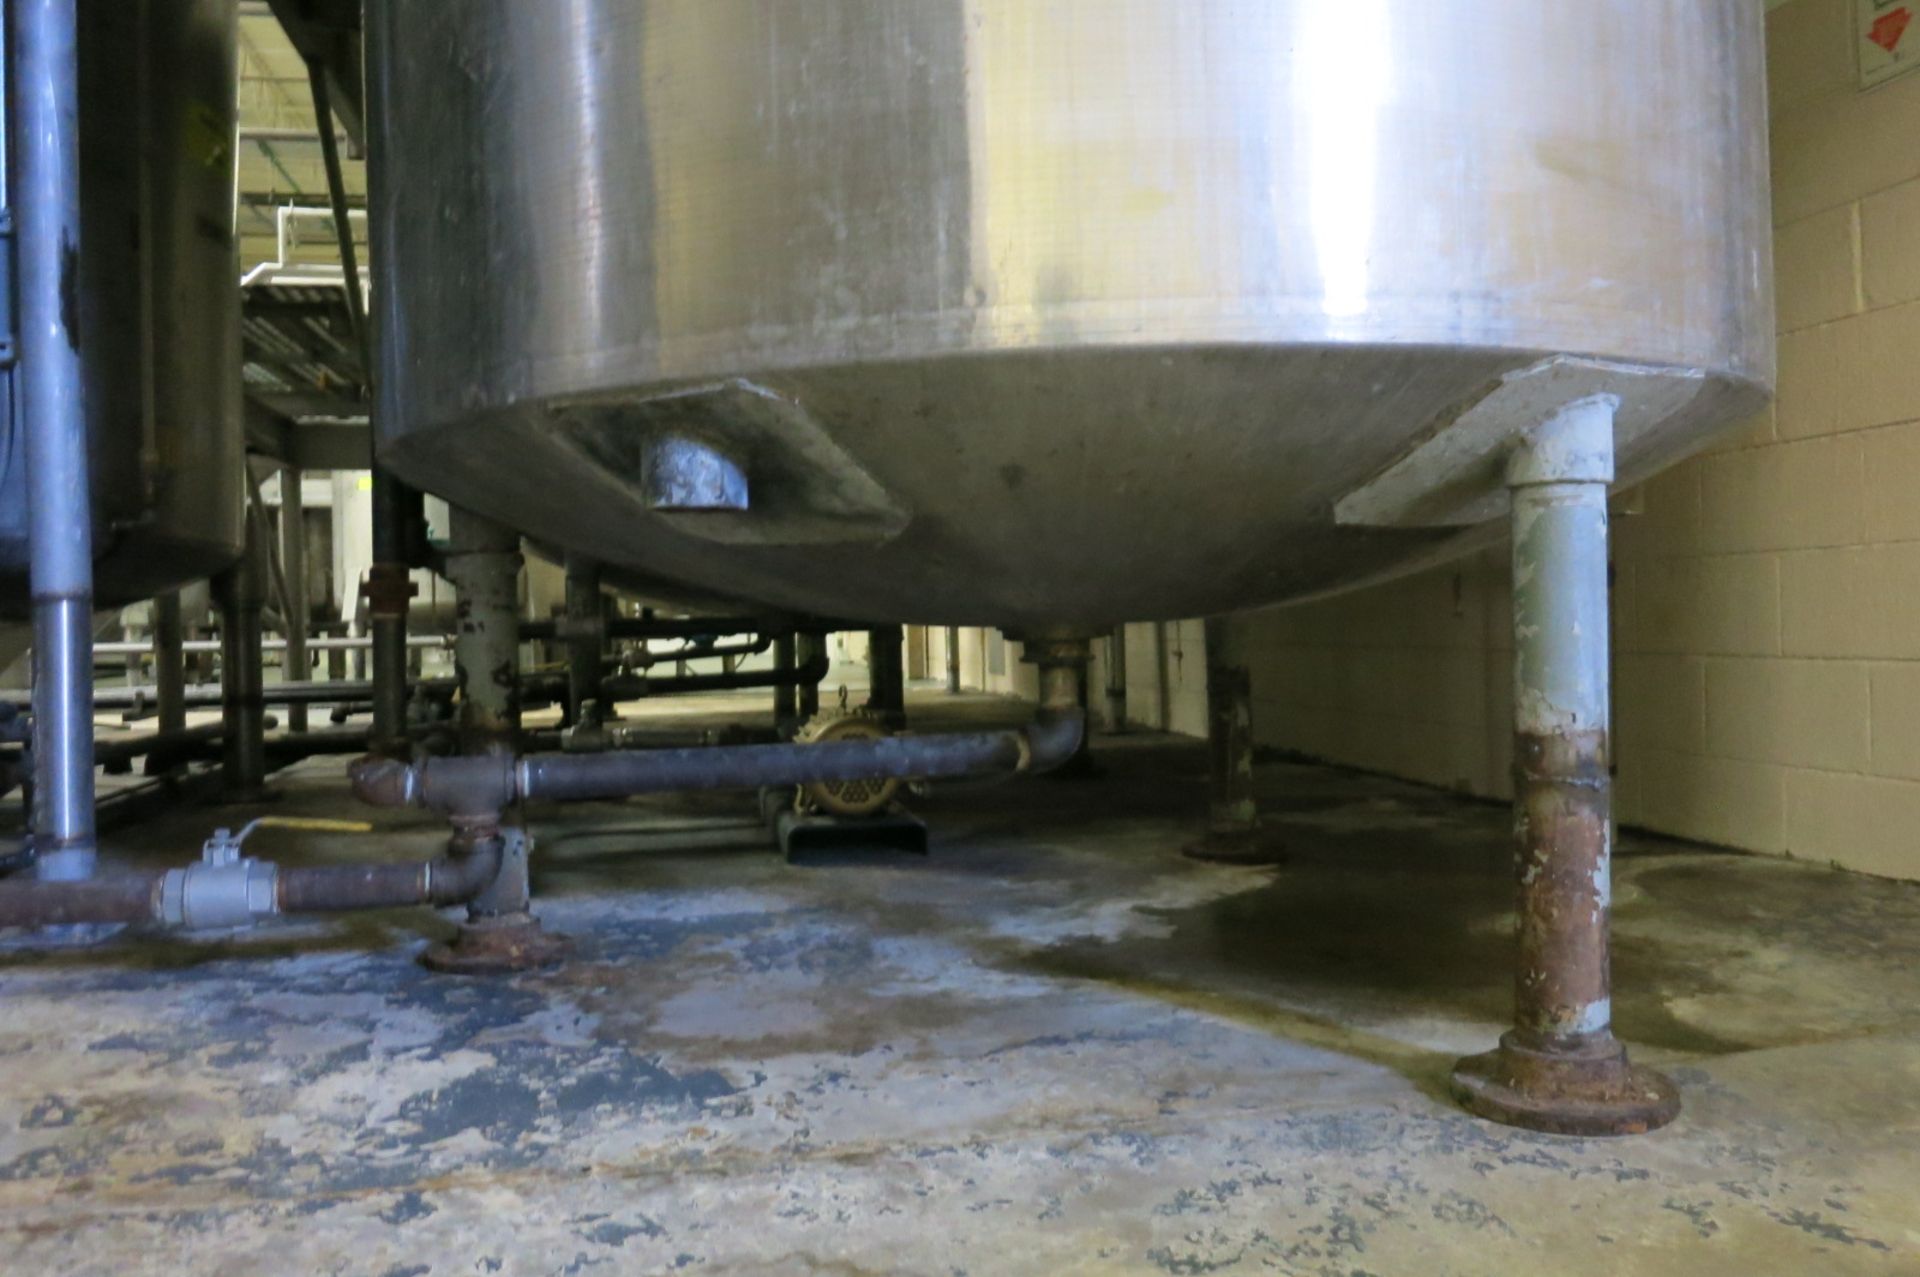 Stainless Tank - Image 2 of 4